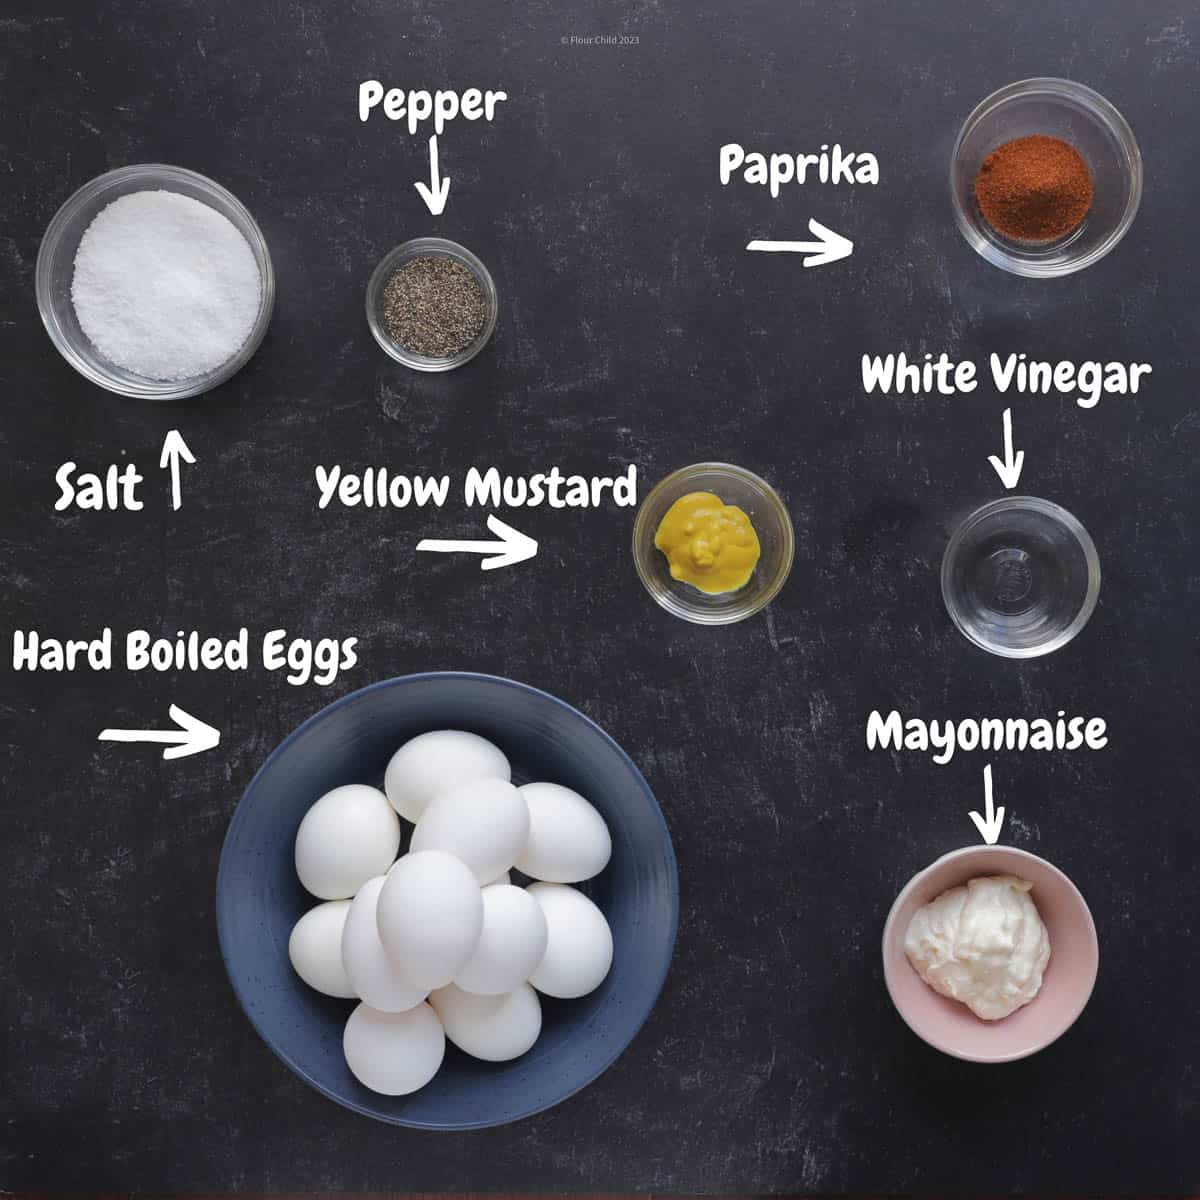 Photo of all ingredients necessary to prepare deviled eggs.